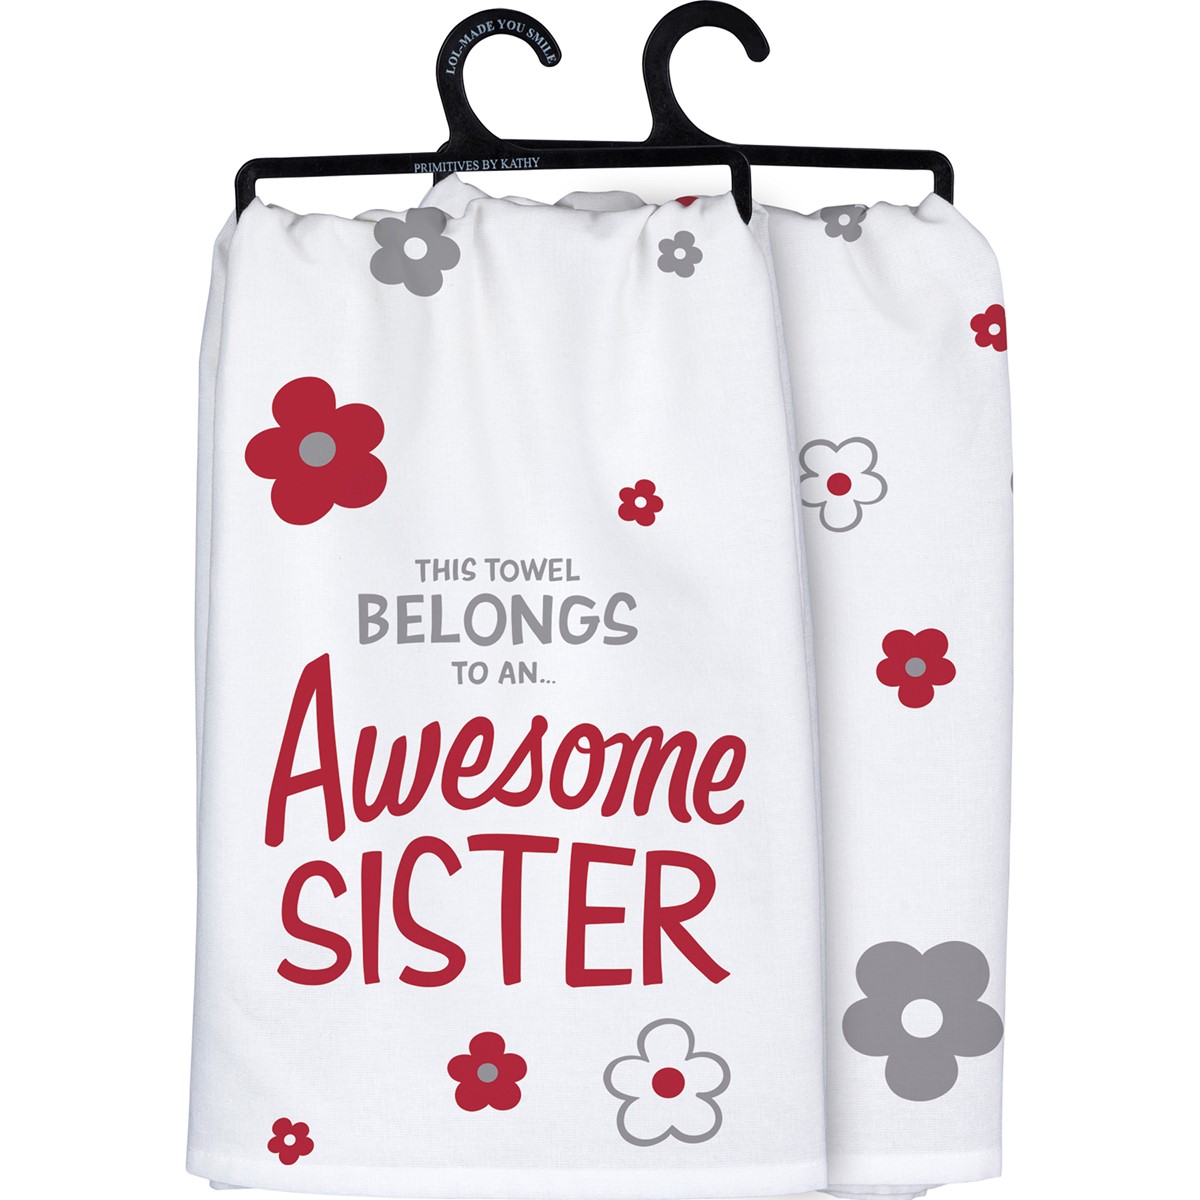 Awesome Sister Kitchen Towel - Cotton